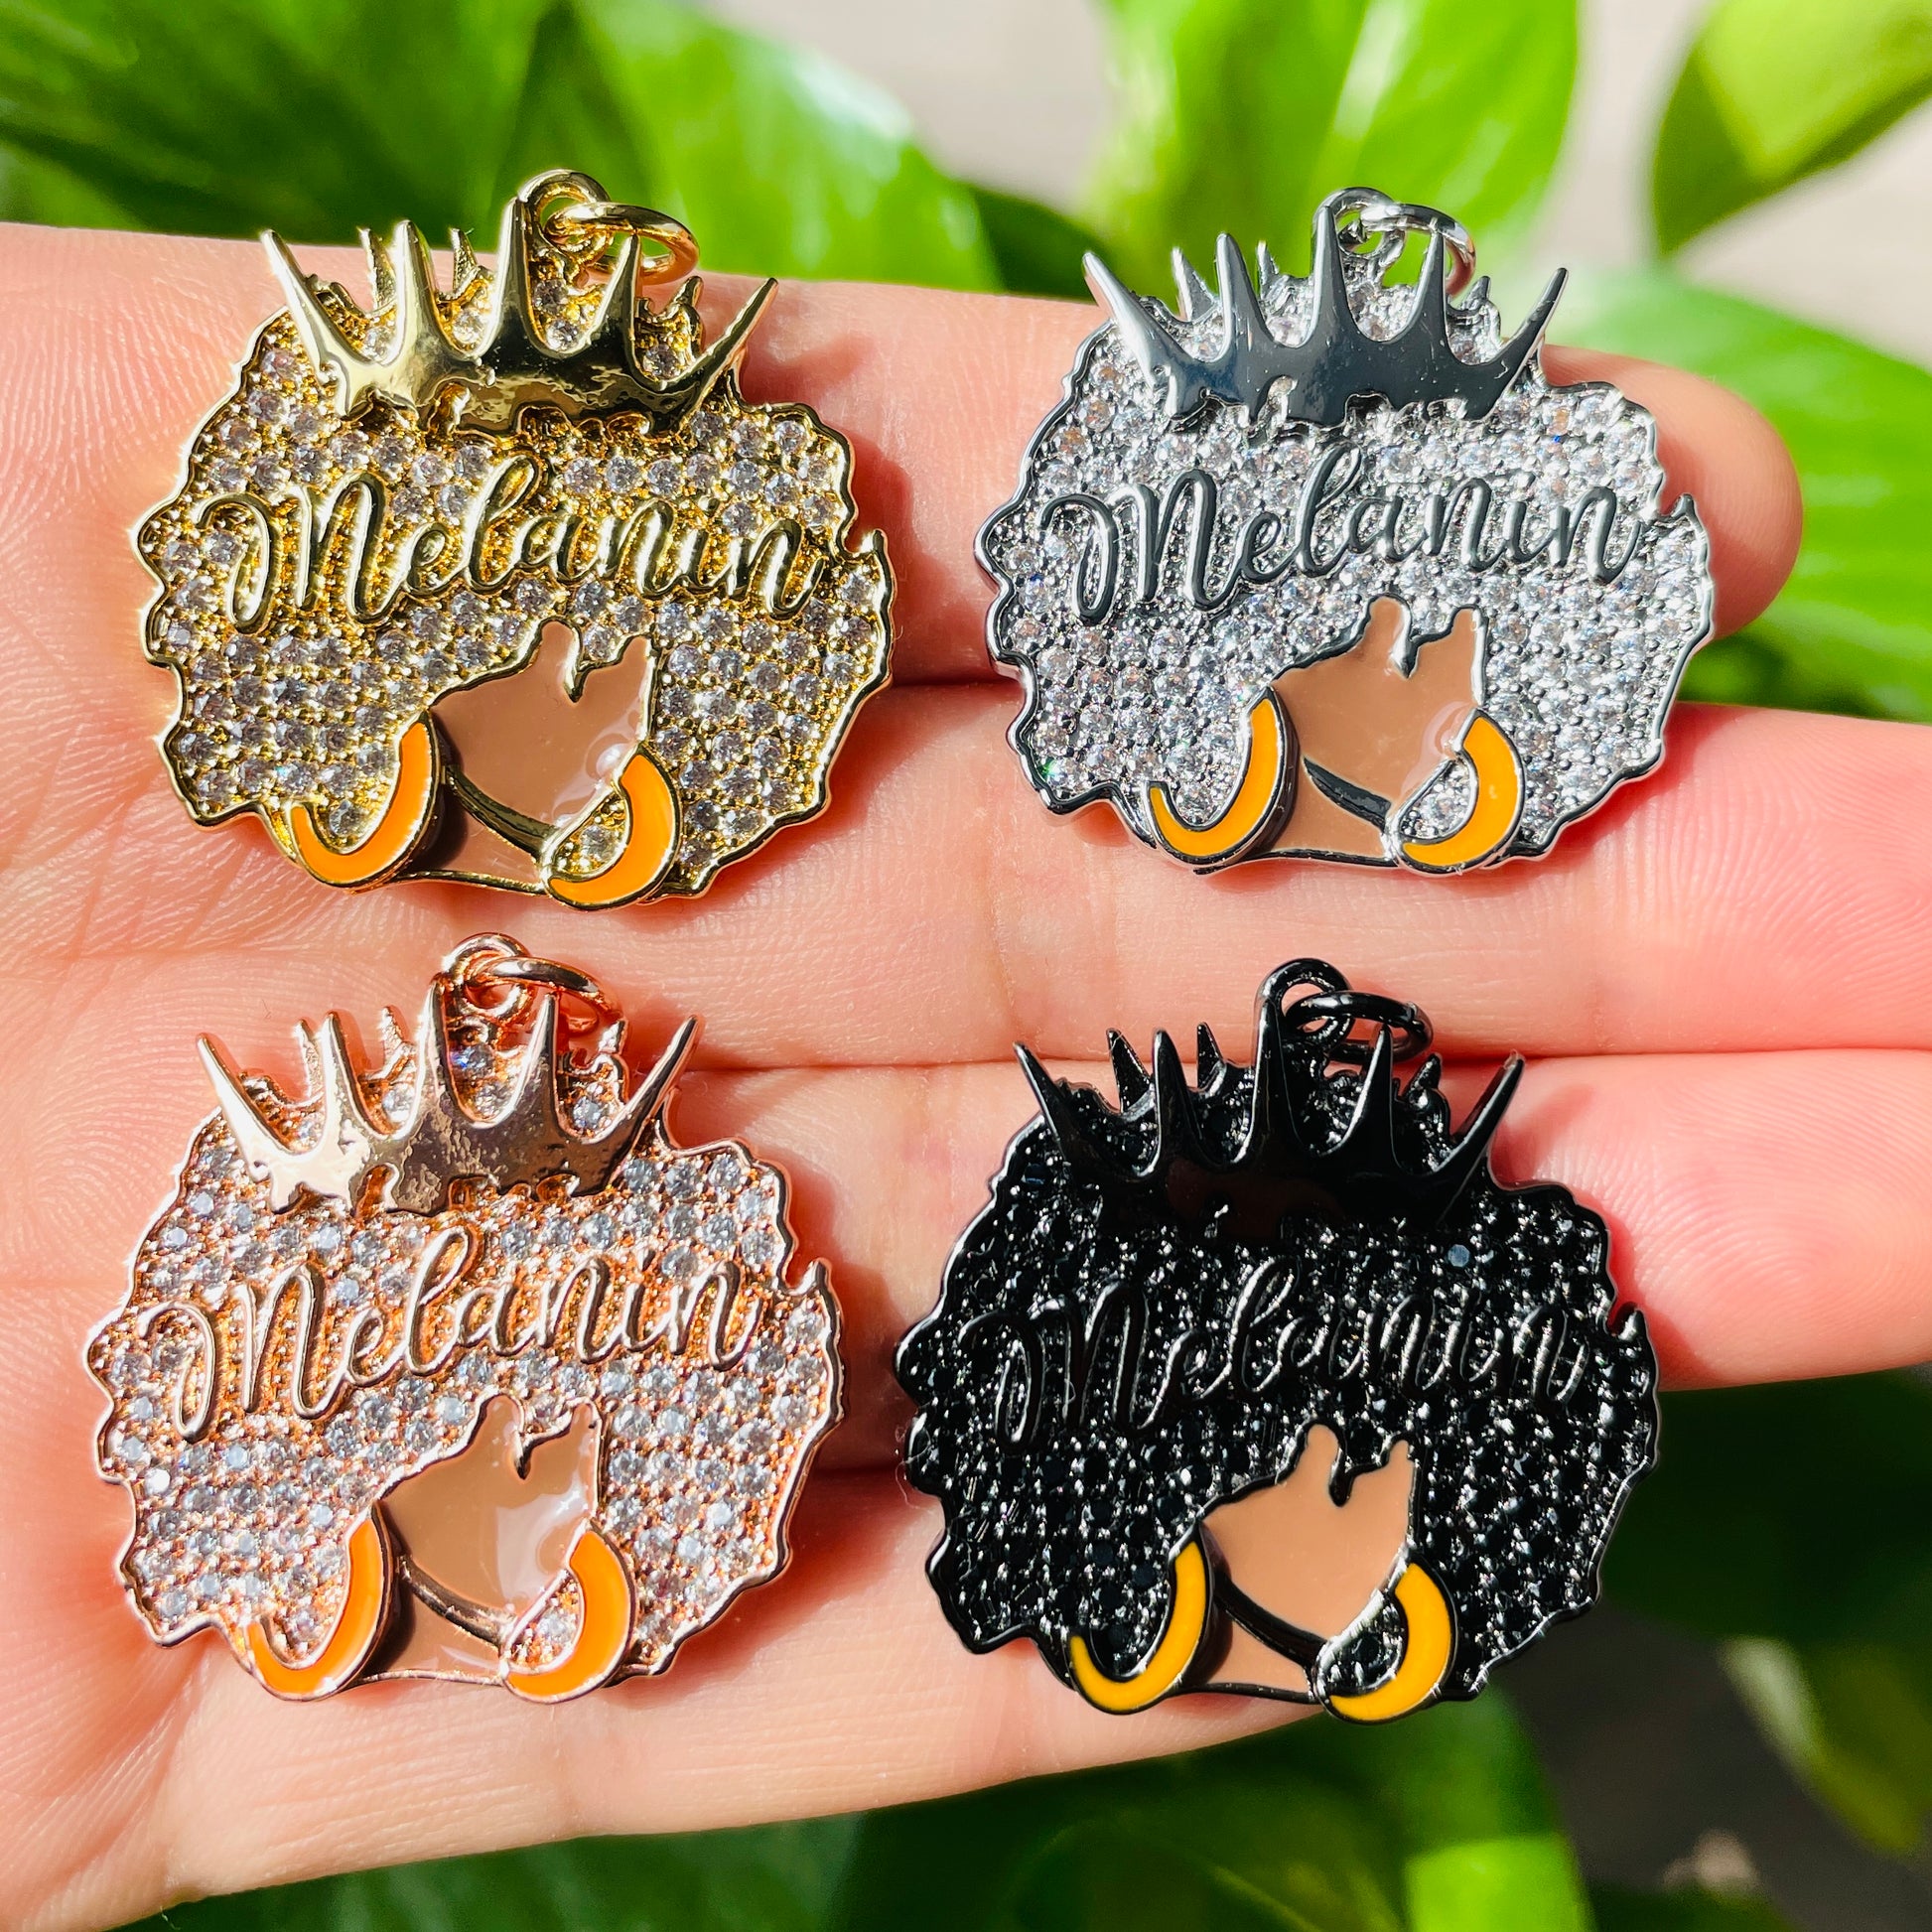 10pcs/lot 29*29mm CZ Paved Crown Queen Melanin Afro Girl Charms Mix Colors CZ Paved Charms Afro Girl/Queen Charms Charms Beads Beyond